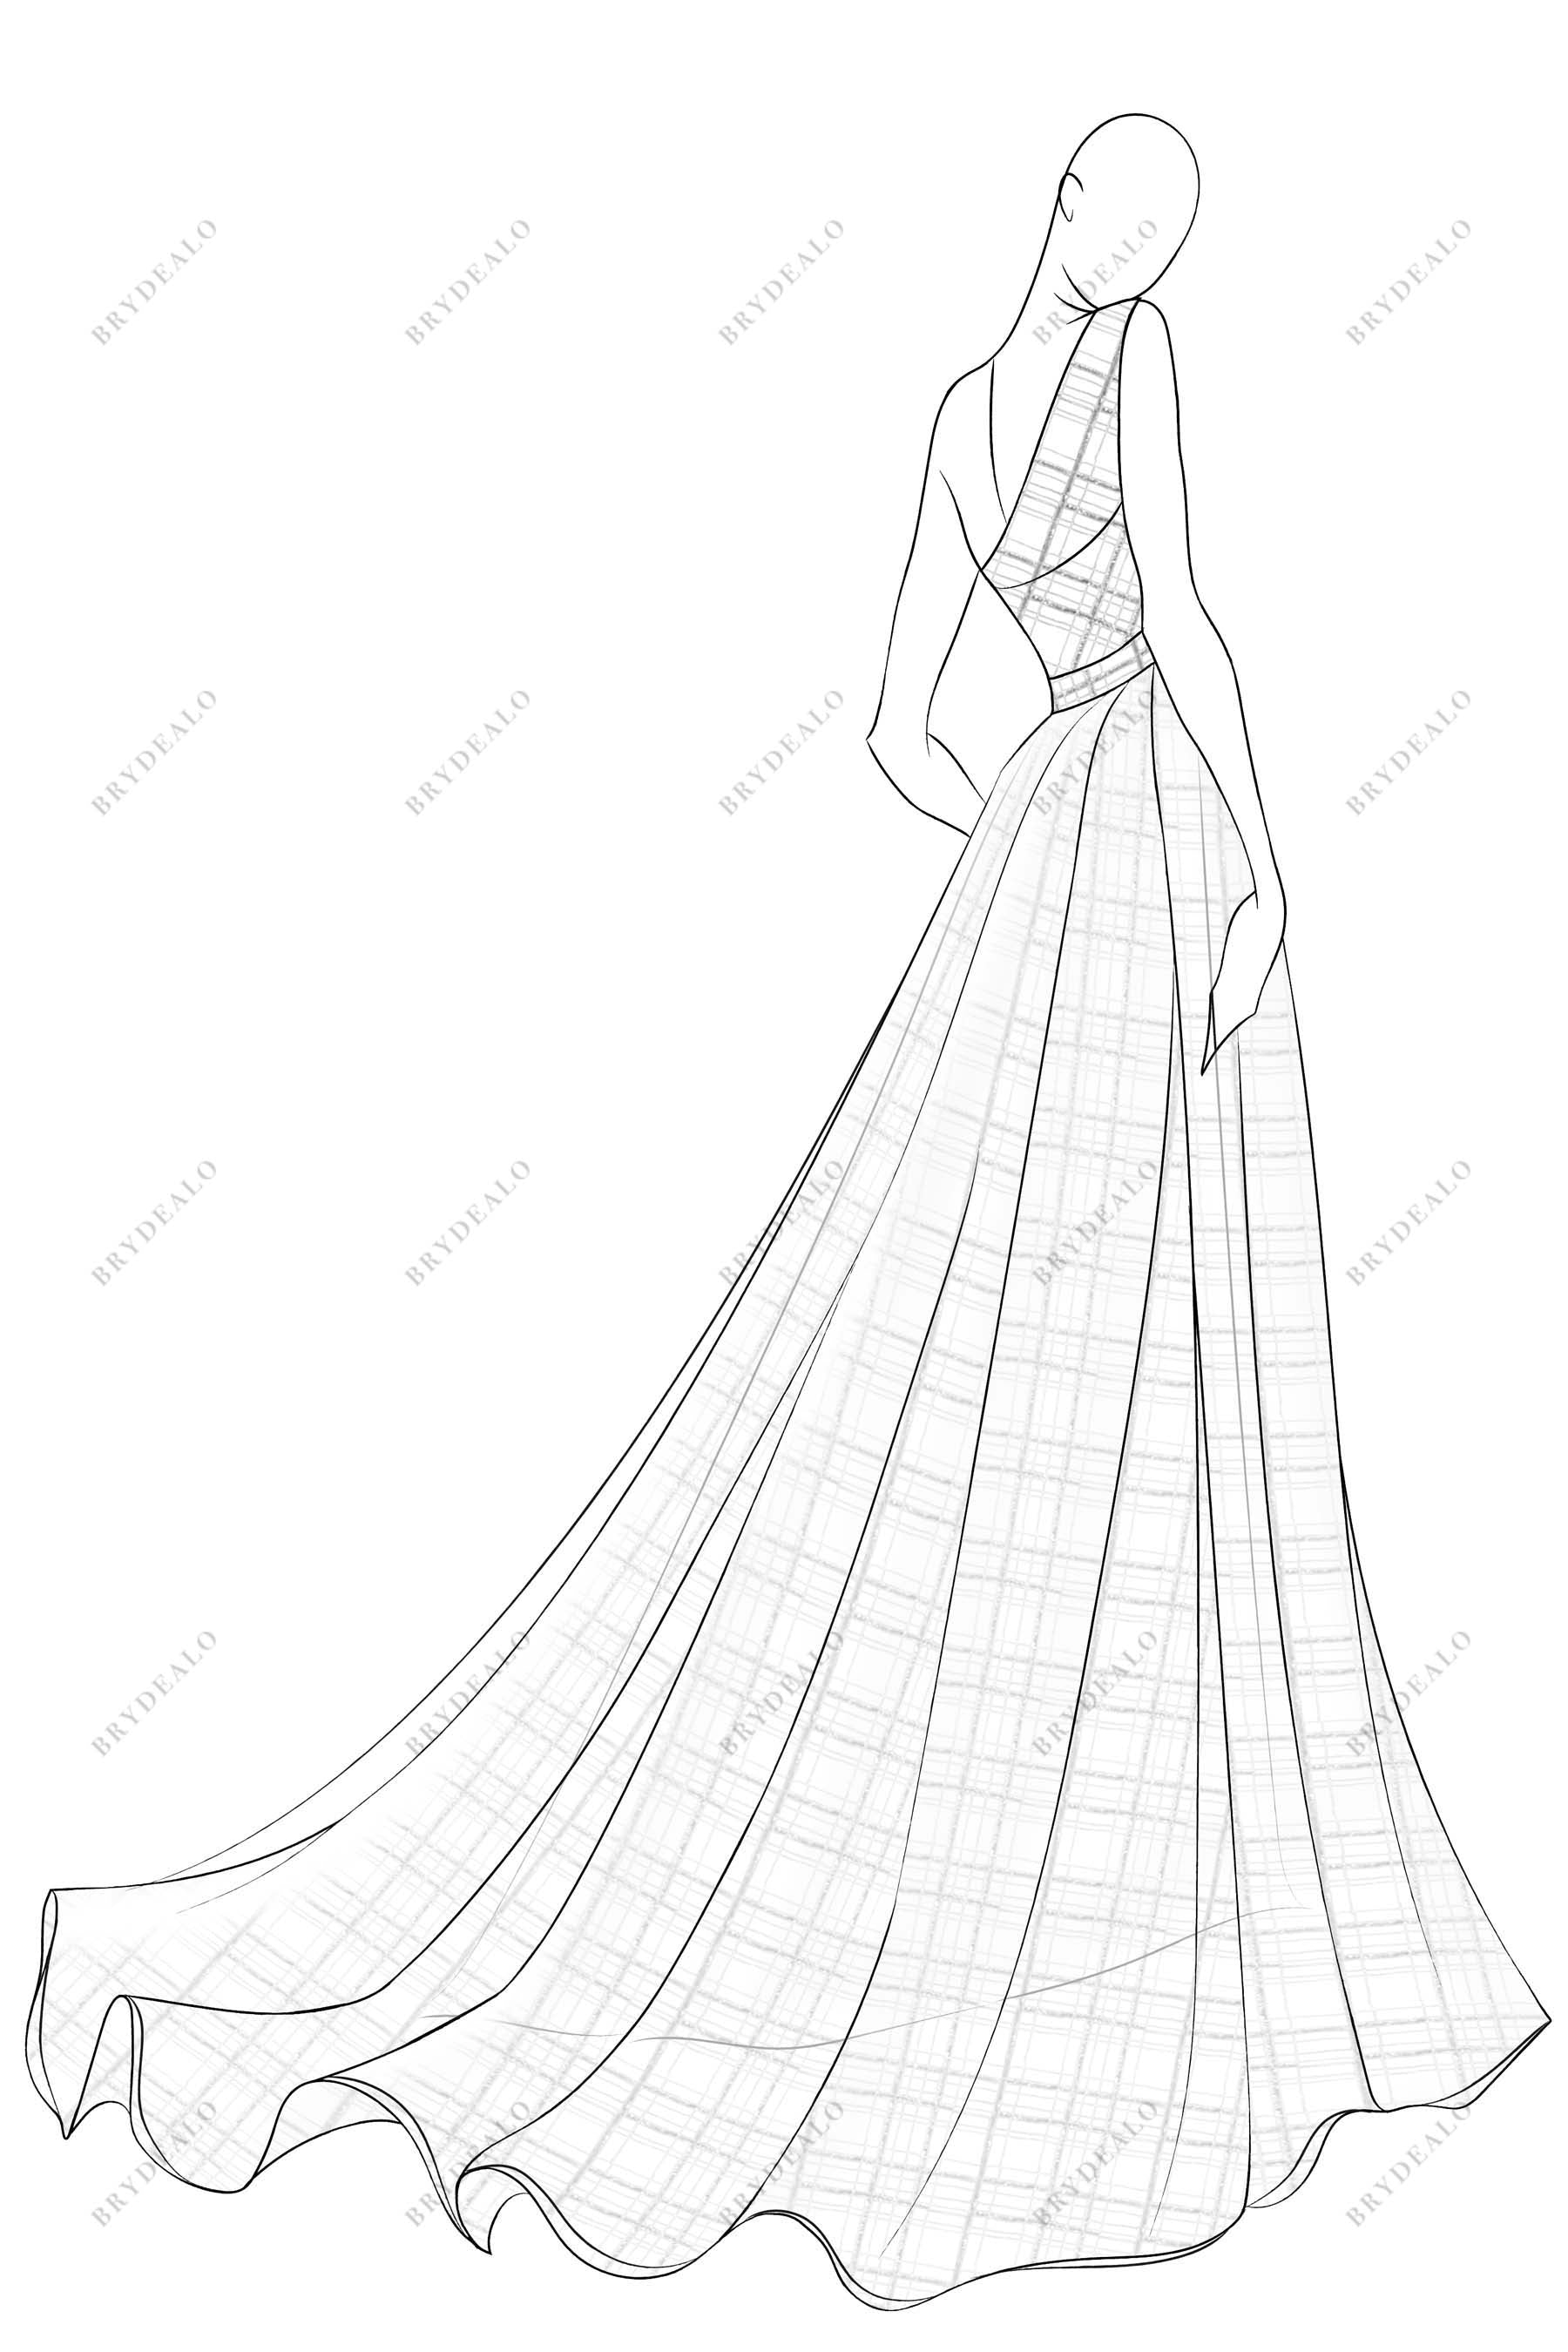 Lace dress on a hanger Royalty Free Vector Image